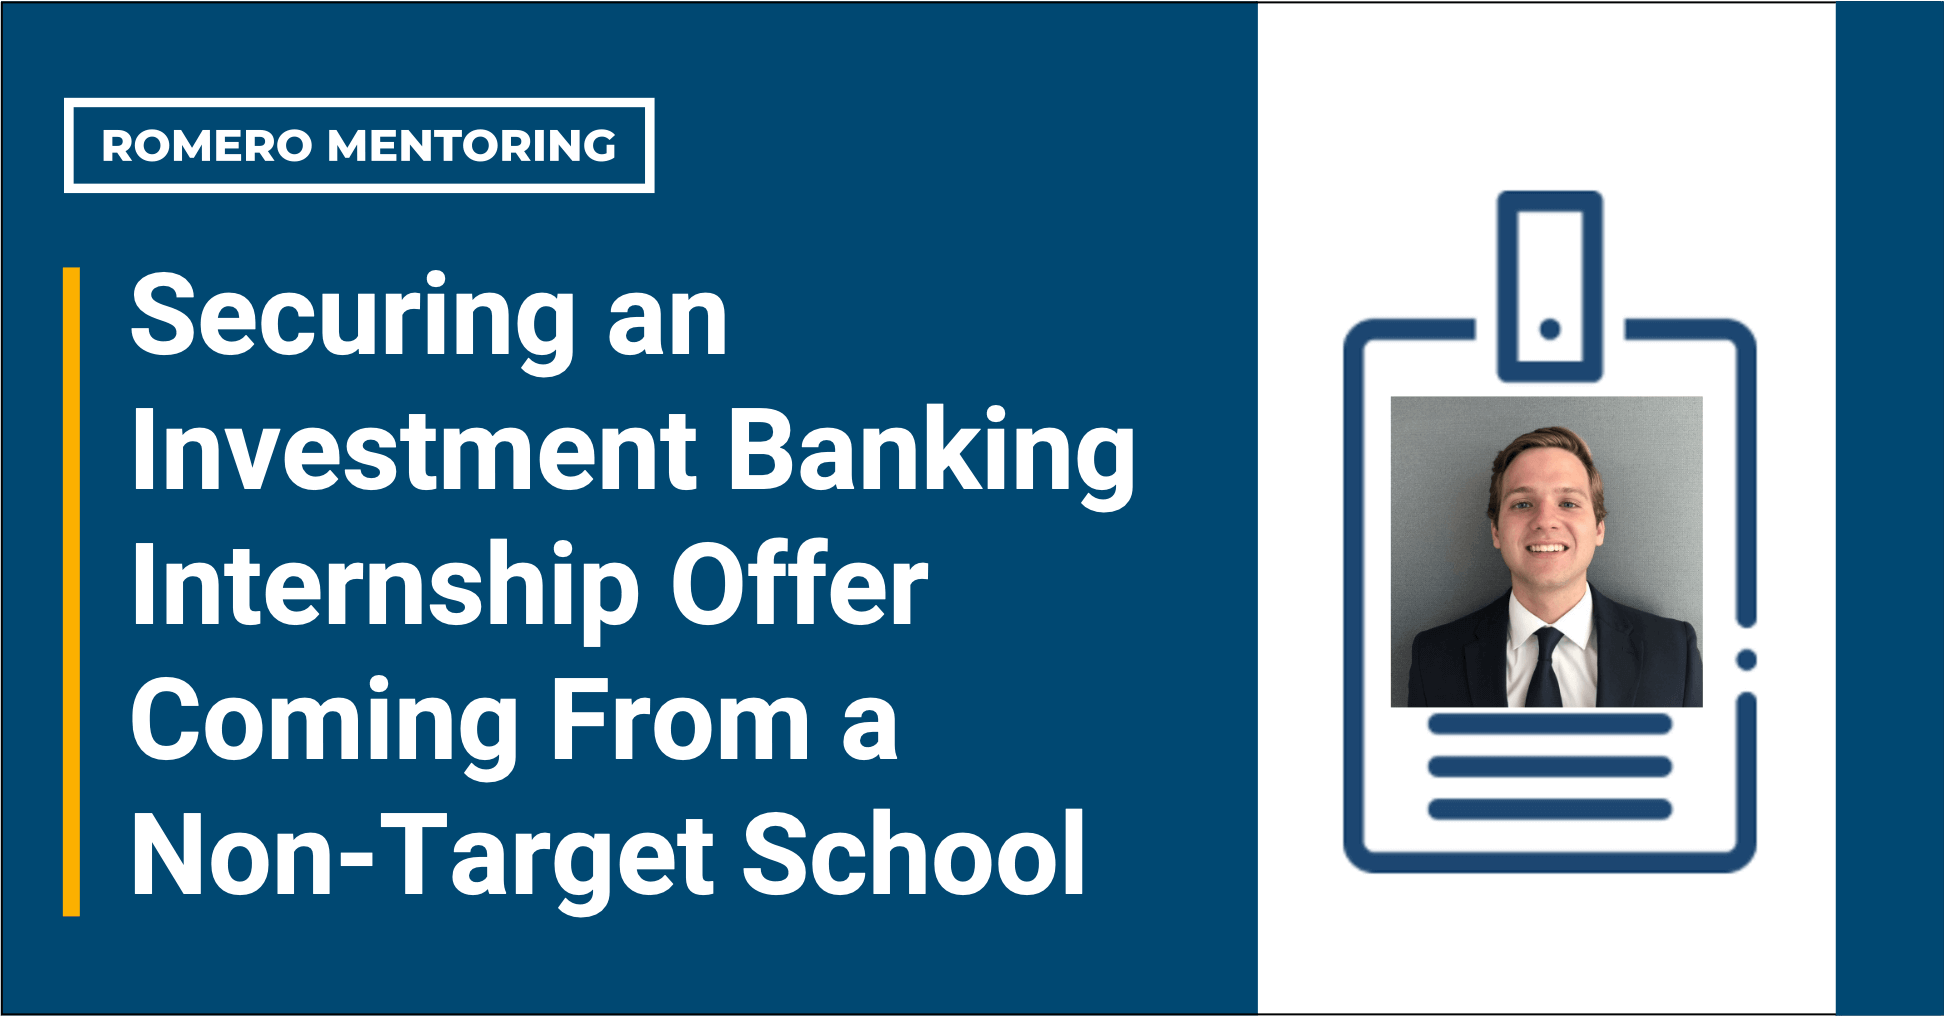 Securing an Investment Banking Internship Offer Coming From a Non-Target School